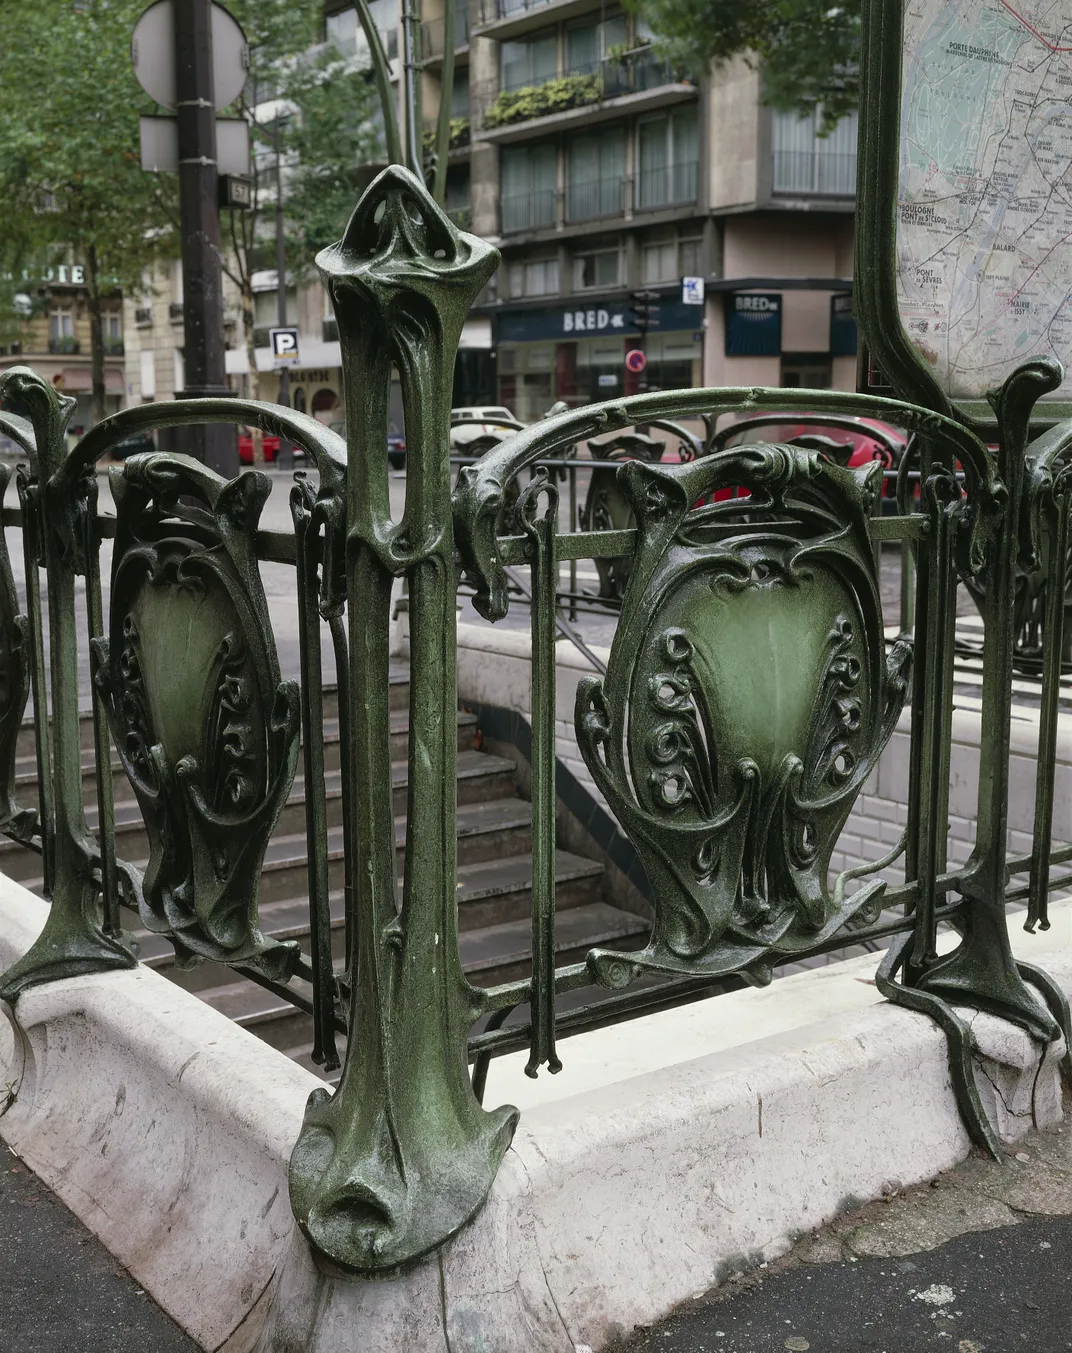 Detail of Art Nouveau railings at the entrance of the Paris metro, by architect Hector Guimard